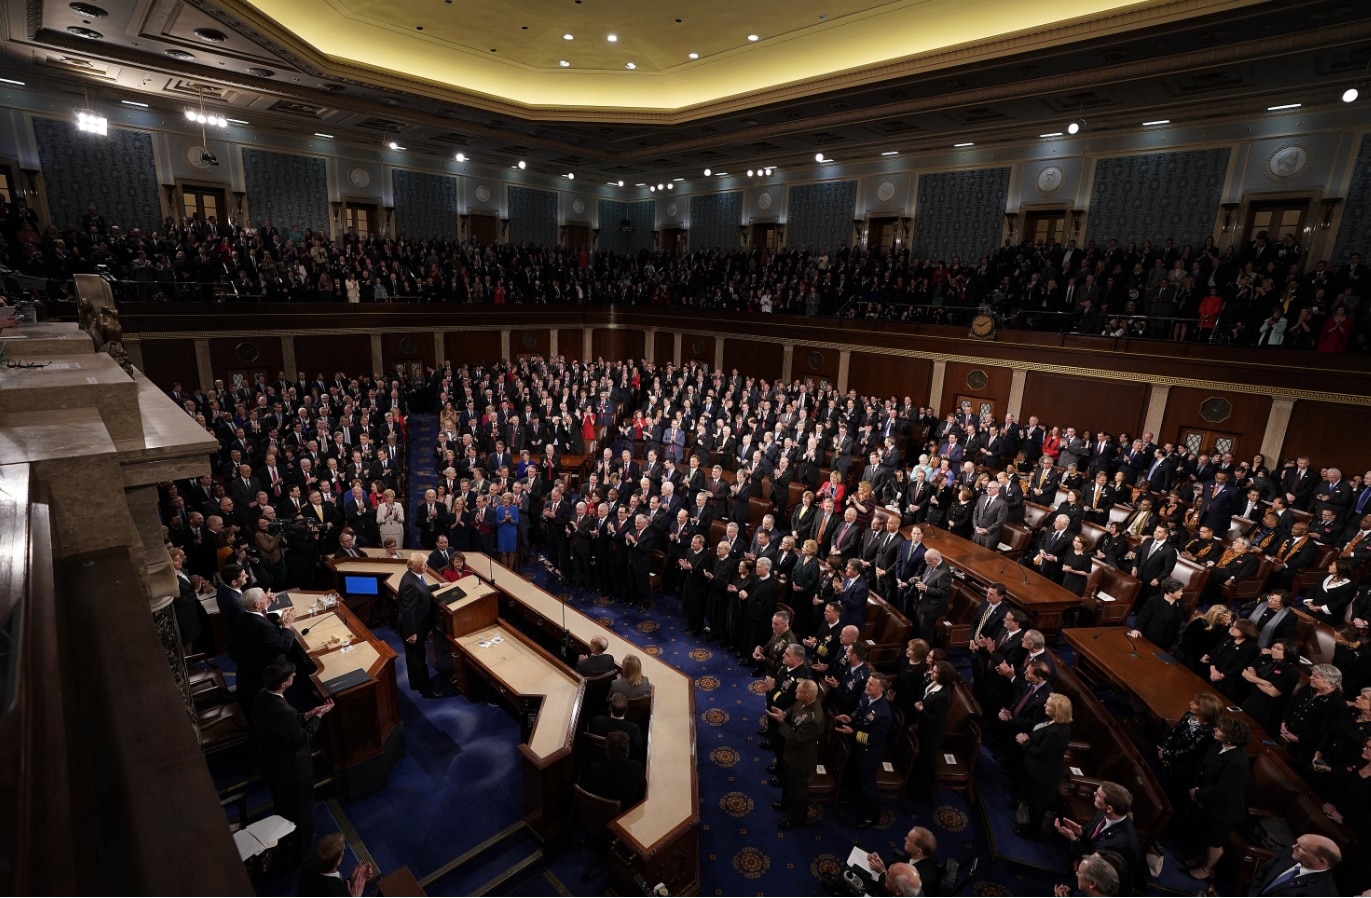 US President Donald J. Trump arrives to deliver his first State of the Union from the floor of the House of Representatives in Washington, DC, USA, 30 January 